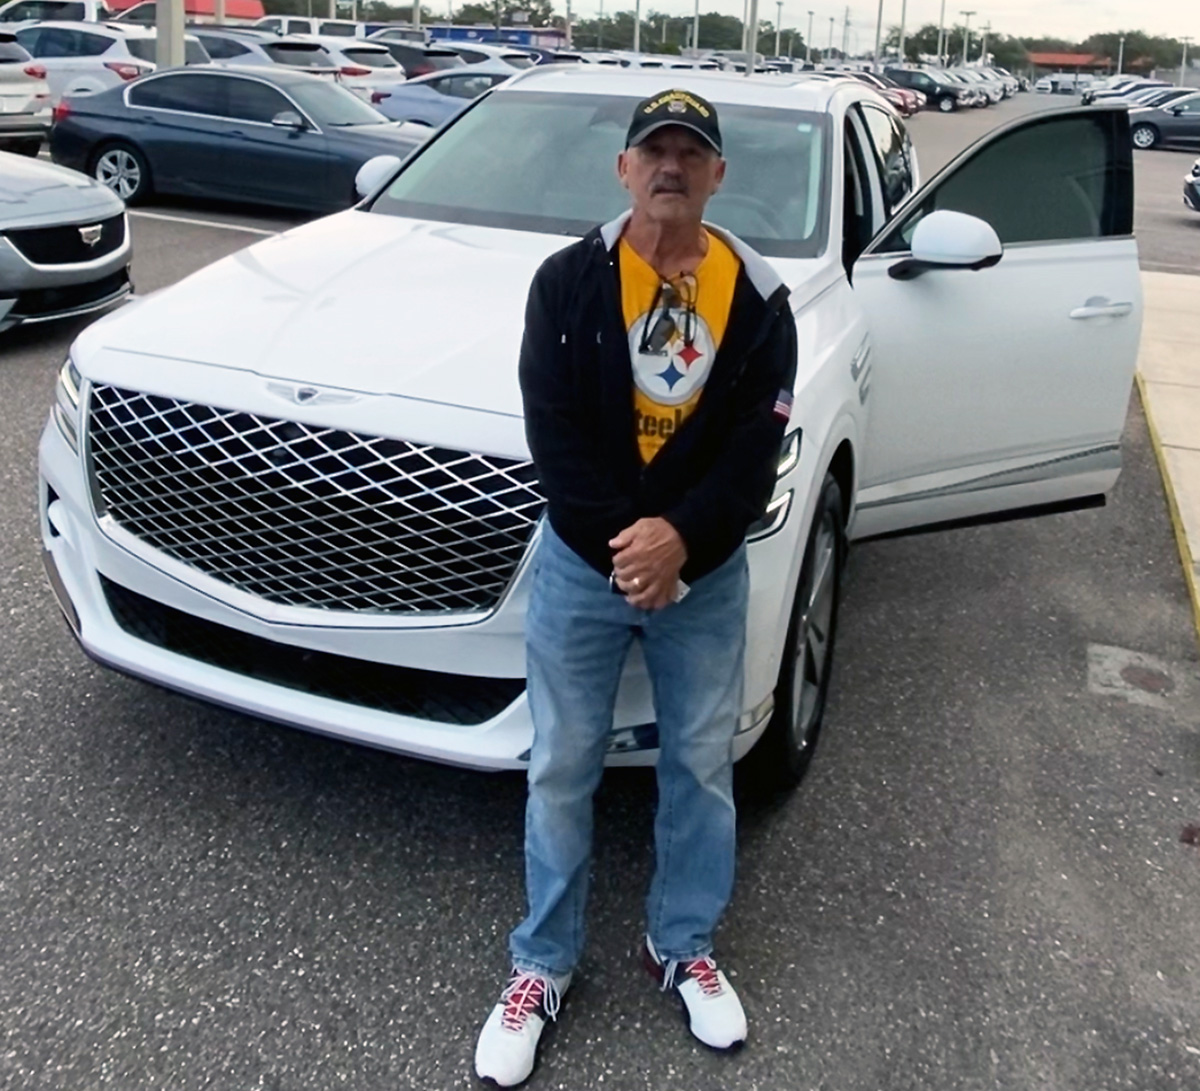 The #GenesisGV80 is a #Popular #LuxurySUV & when Gary Oliver was searching the internet for a #GreatDeal, it was #LakelandAutomall that had just what he was looking for & salesperson #TimBrester made sure buying was #Fast, #Fun & #Easy - #Congratulations Gary- we're here for you!